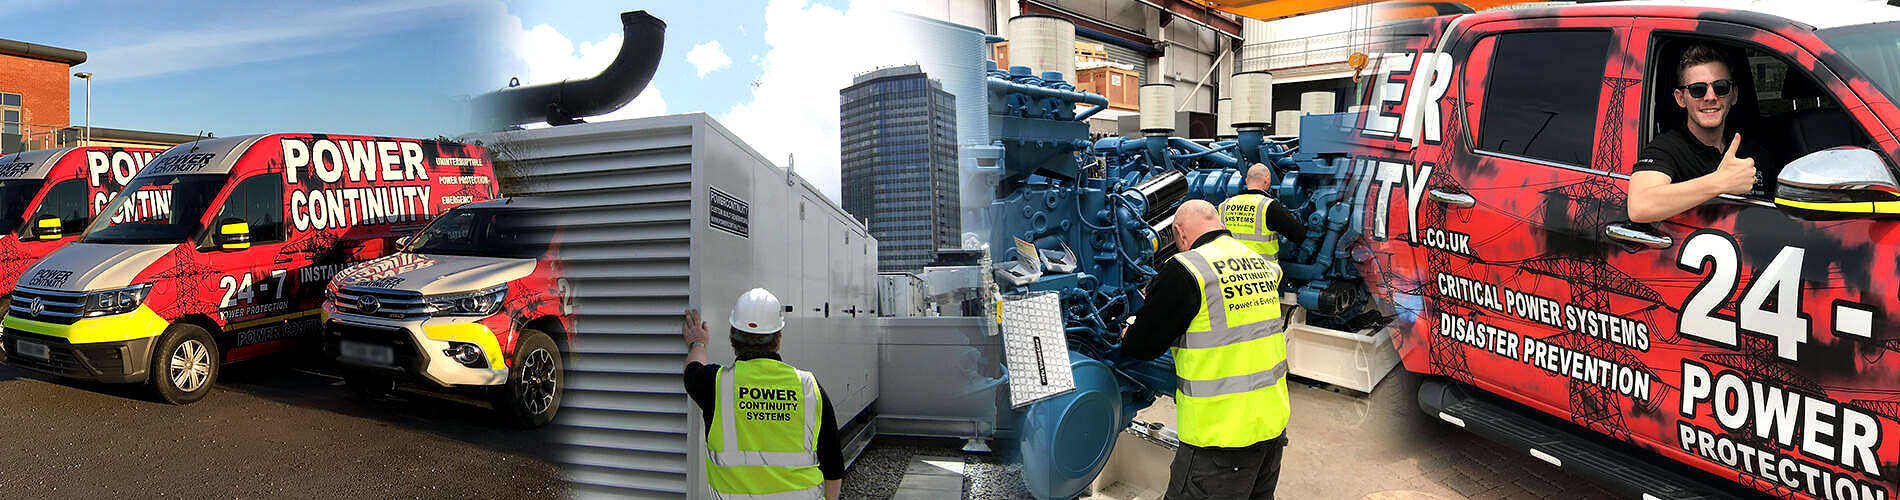 Power Continuity Systems Ltd